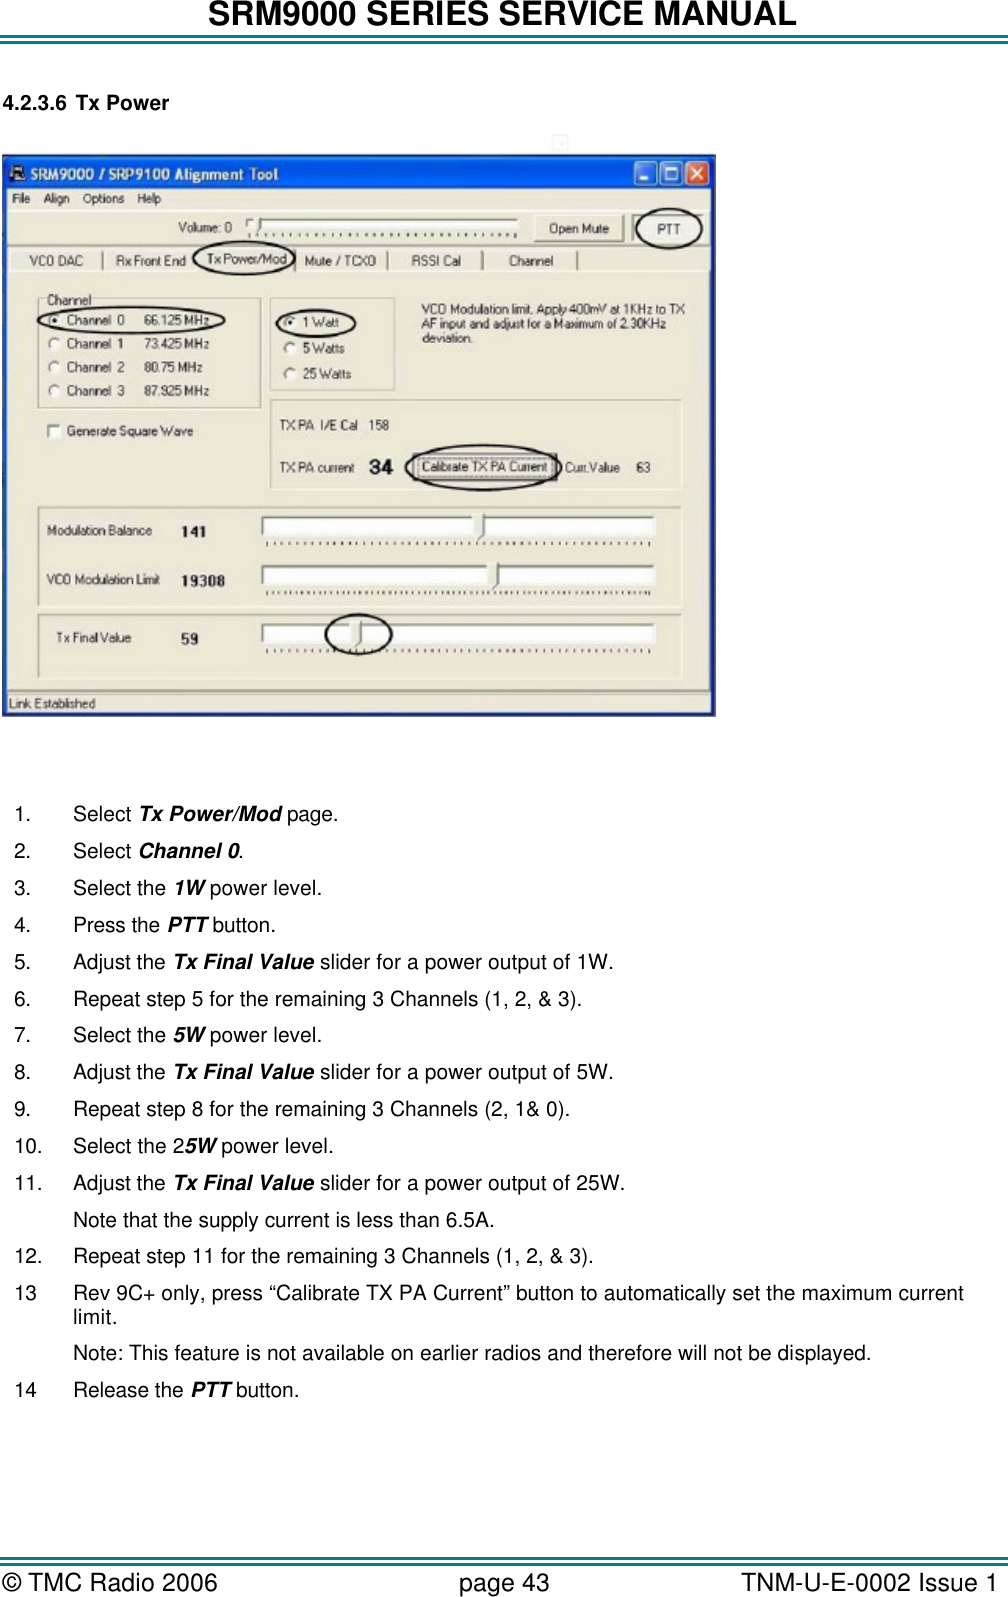 SRM9000 SERIES SERVICE MANUAL © TMC Radio 2006 page 43   TNM-U-E-0002 Issue 1  4.2.3.6 Tx Power    1. Select Tx Power/Mod page. 2. Select Channel 0. 3. Select the 1W power level. 4. Press the PTT button. 5. Adjust the Tx Final Value slider for a power output of 1W. 6. Repeat step 5 for the remaining 3 Channels (1, 2, &amp; 3). 7. Select the 5W power level. 8. Adjust the Tx Final Value slider for a power output of 5W. 9. Repeat step 8 for the remaining 3 Channels (2, 1&amp; 0). 10. Select the 25W power level. 11. Adjust the Tx Final Value slider for a power output of 25W. Note that the supply current is less than 6.5A. 12. Repeat step 11 for the remaining 3 Channels (1, 2, &amp; 3). 13 Rev 9C+ only, press “Calibrate TX PA Current” button to automatically set the maximum current limit. Note: This feature is not available on earlier radios and therefore will not be displayed. 14 Release the PTT button. 